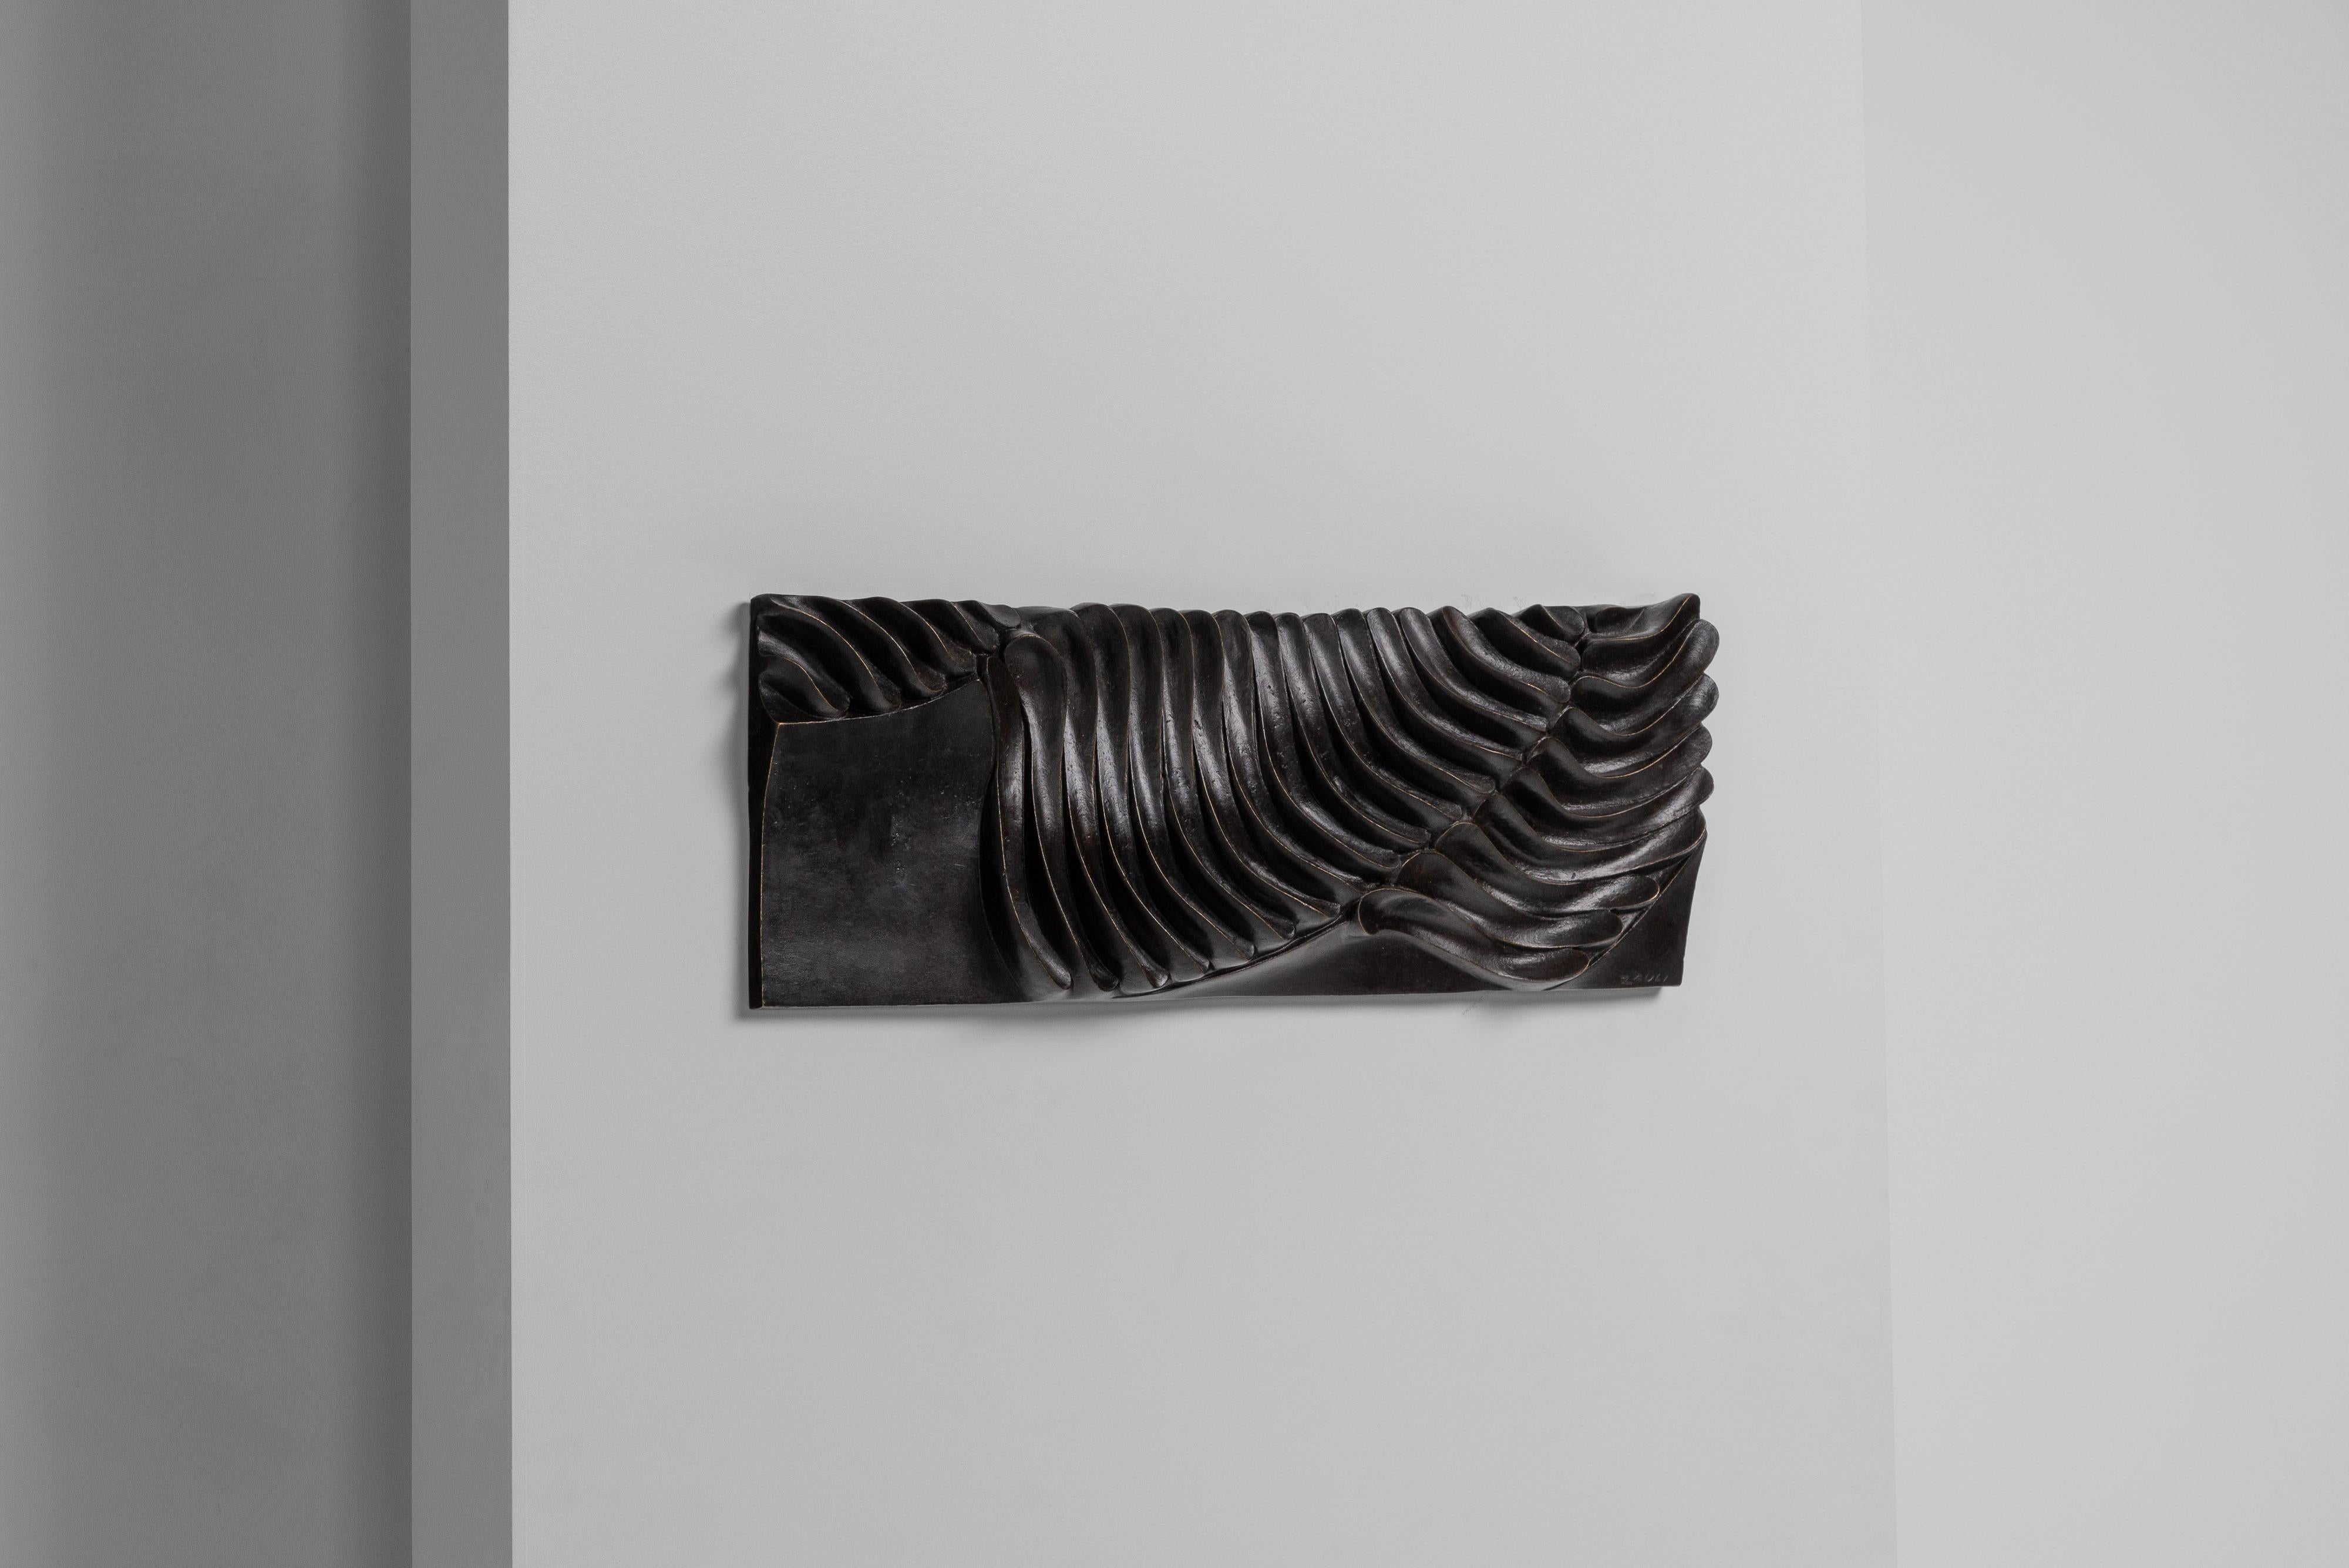 Stunning abstract wall sculpture beautifully handmade by Carlo Zauli in his Italian workshop during the 1960s. It's a substantial piece, expertly made from solid bronze. The organic shaped sculpture includes its original white painted wooden back